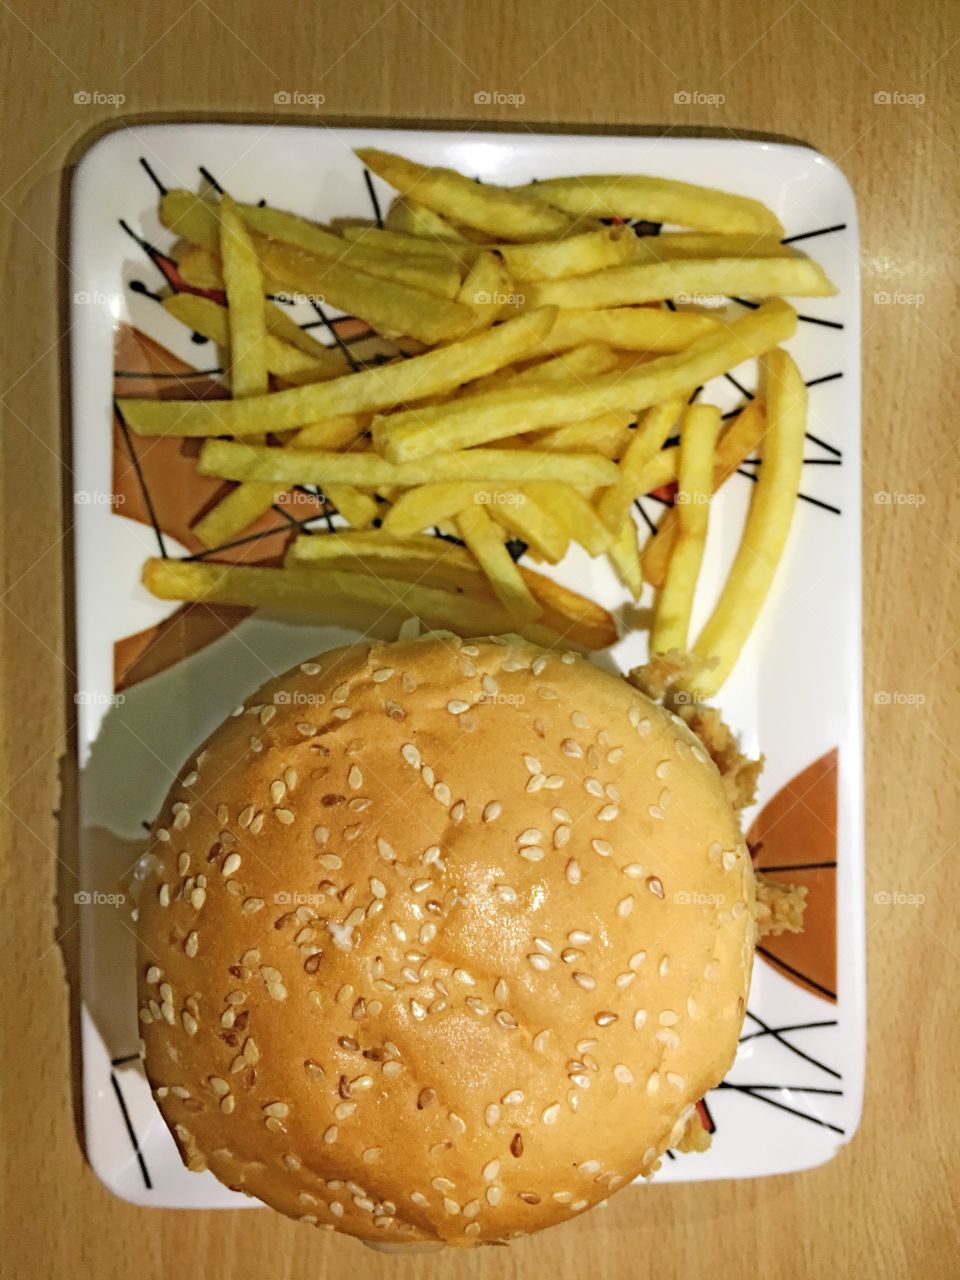 Burger King & French fries 